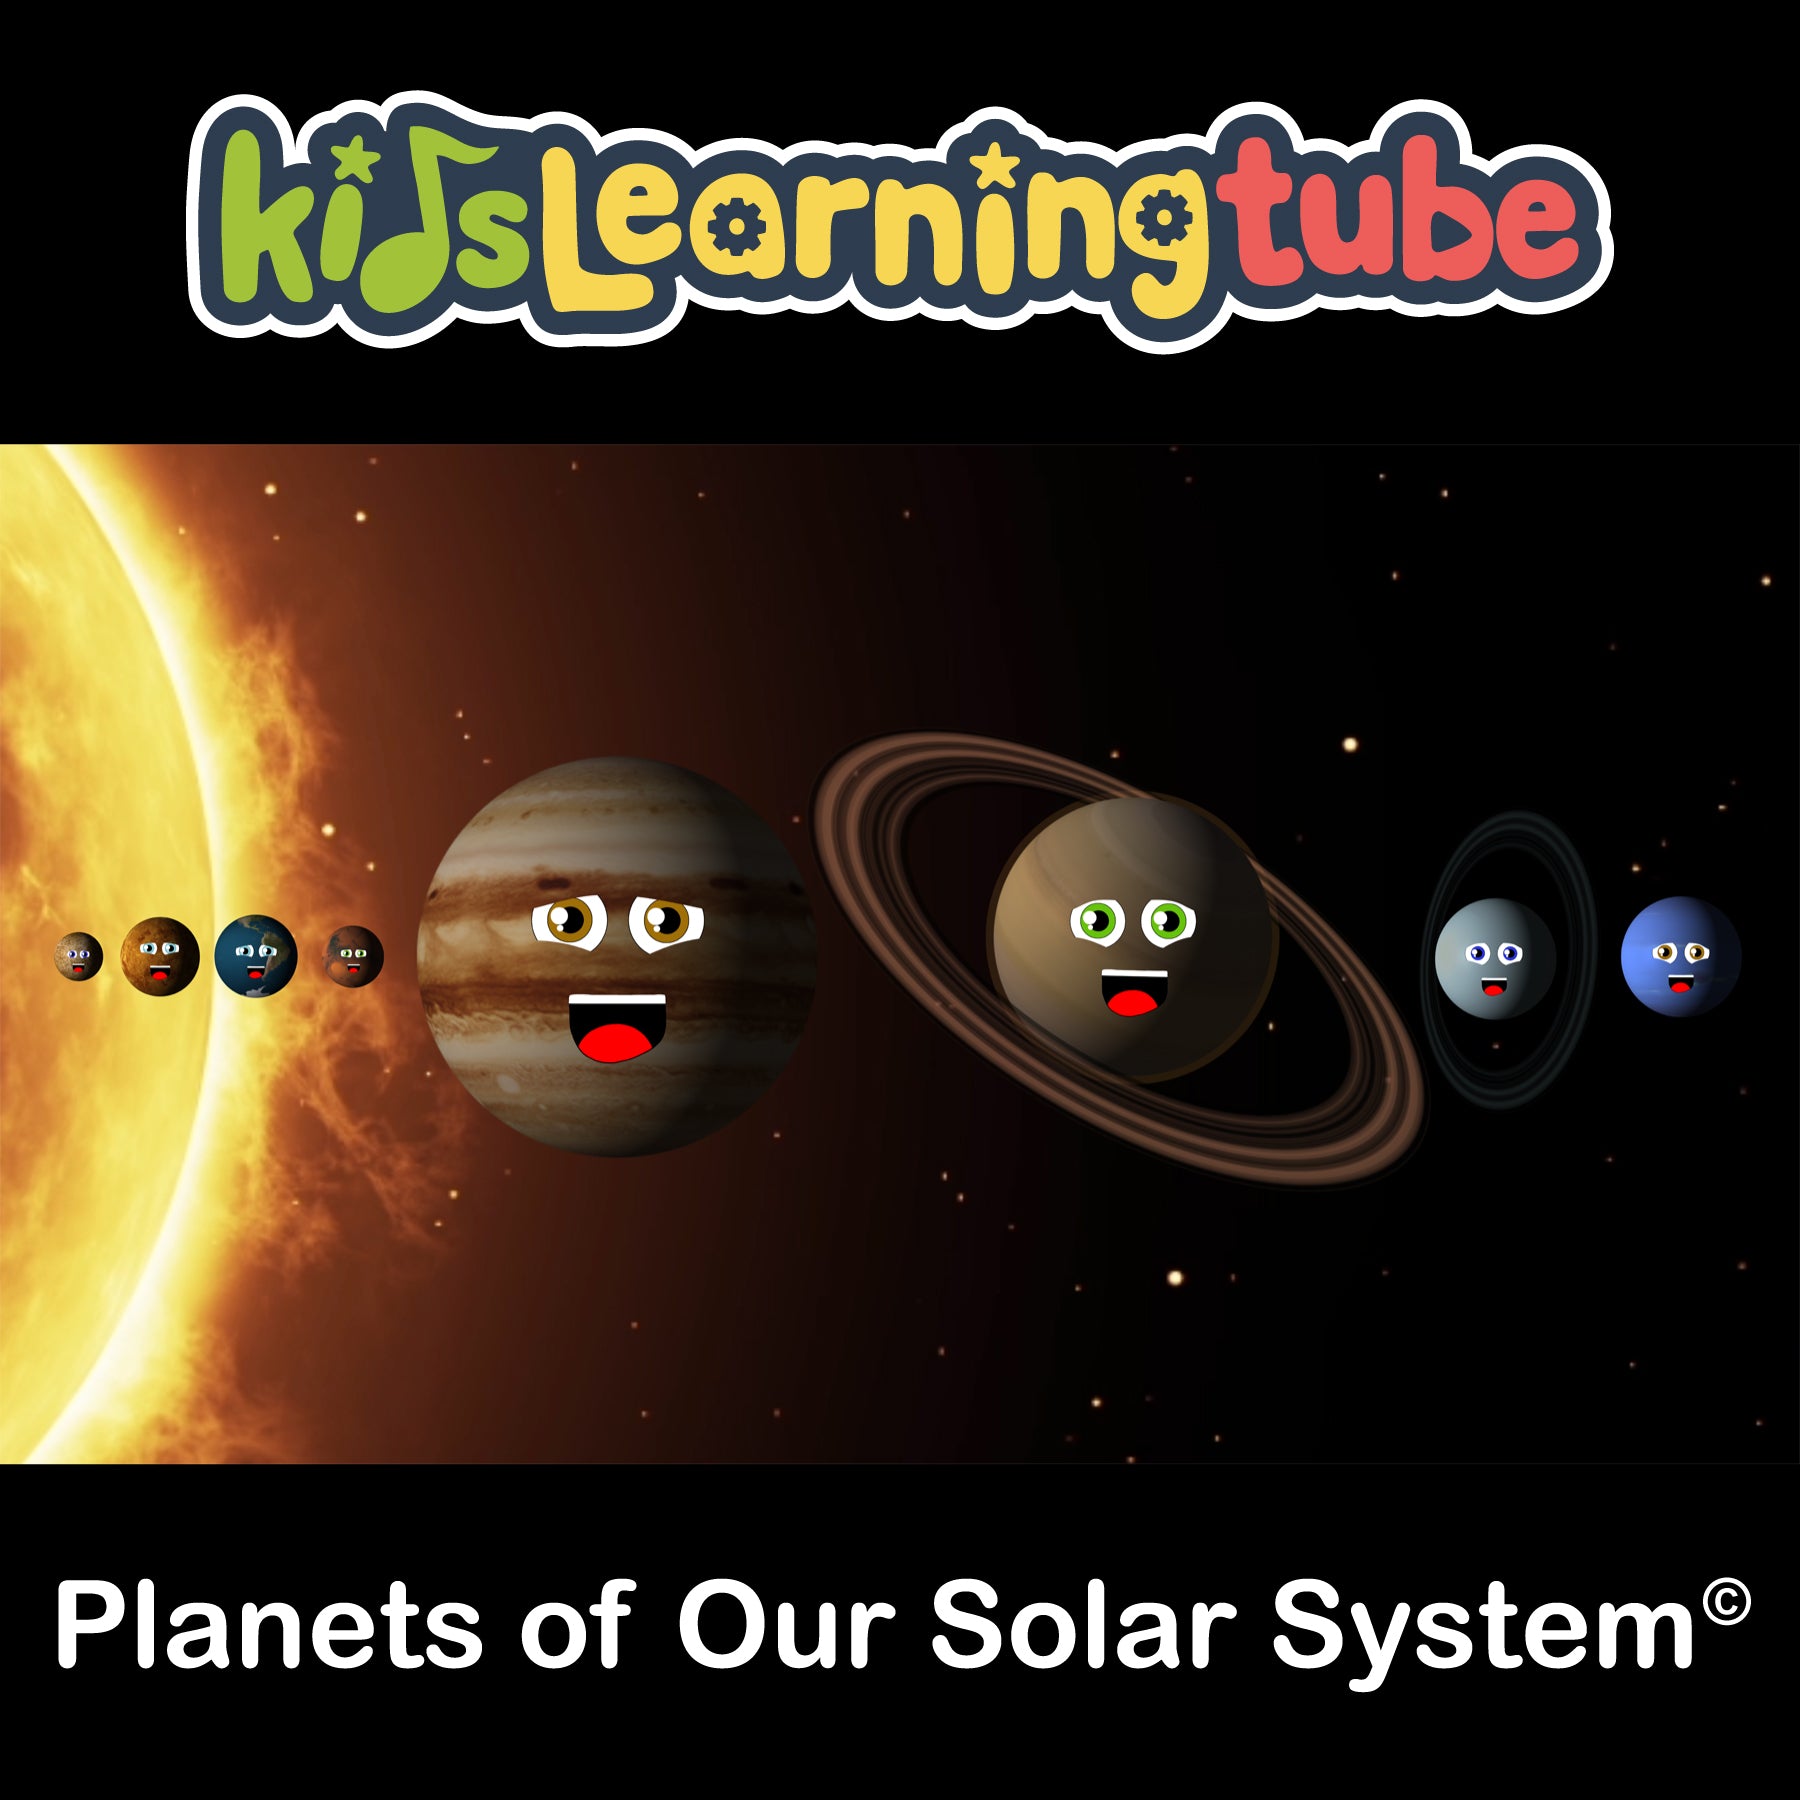 Planets of Our Solar System Digital Album